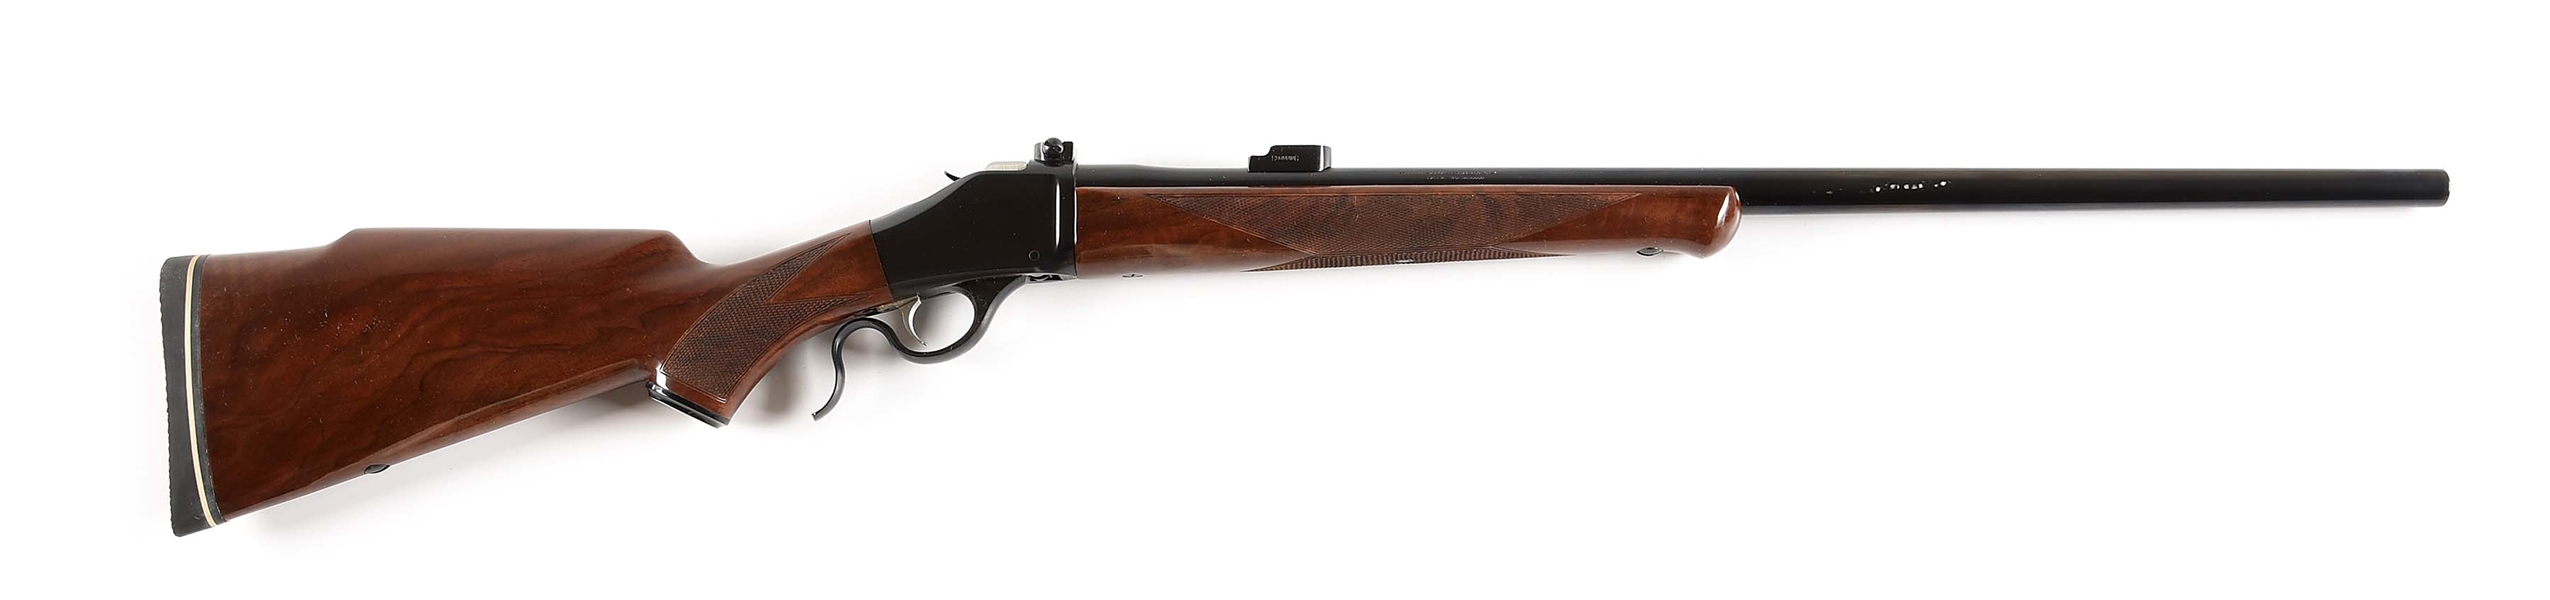 (M) BROWNING B78 SINGLE SHOT RIFLE IN .22-250 WITH BOX.